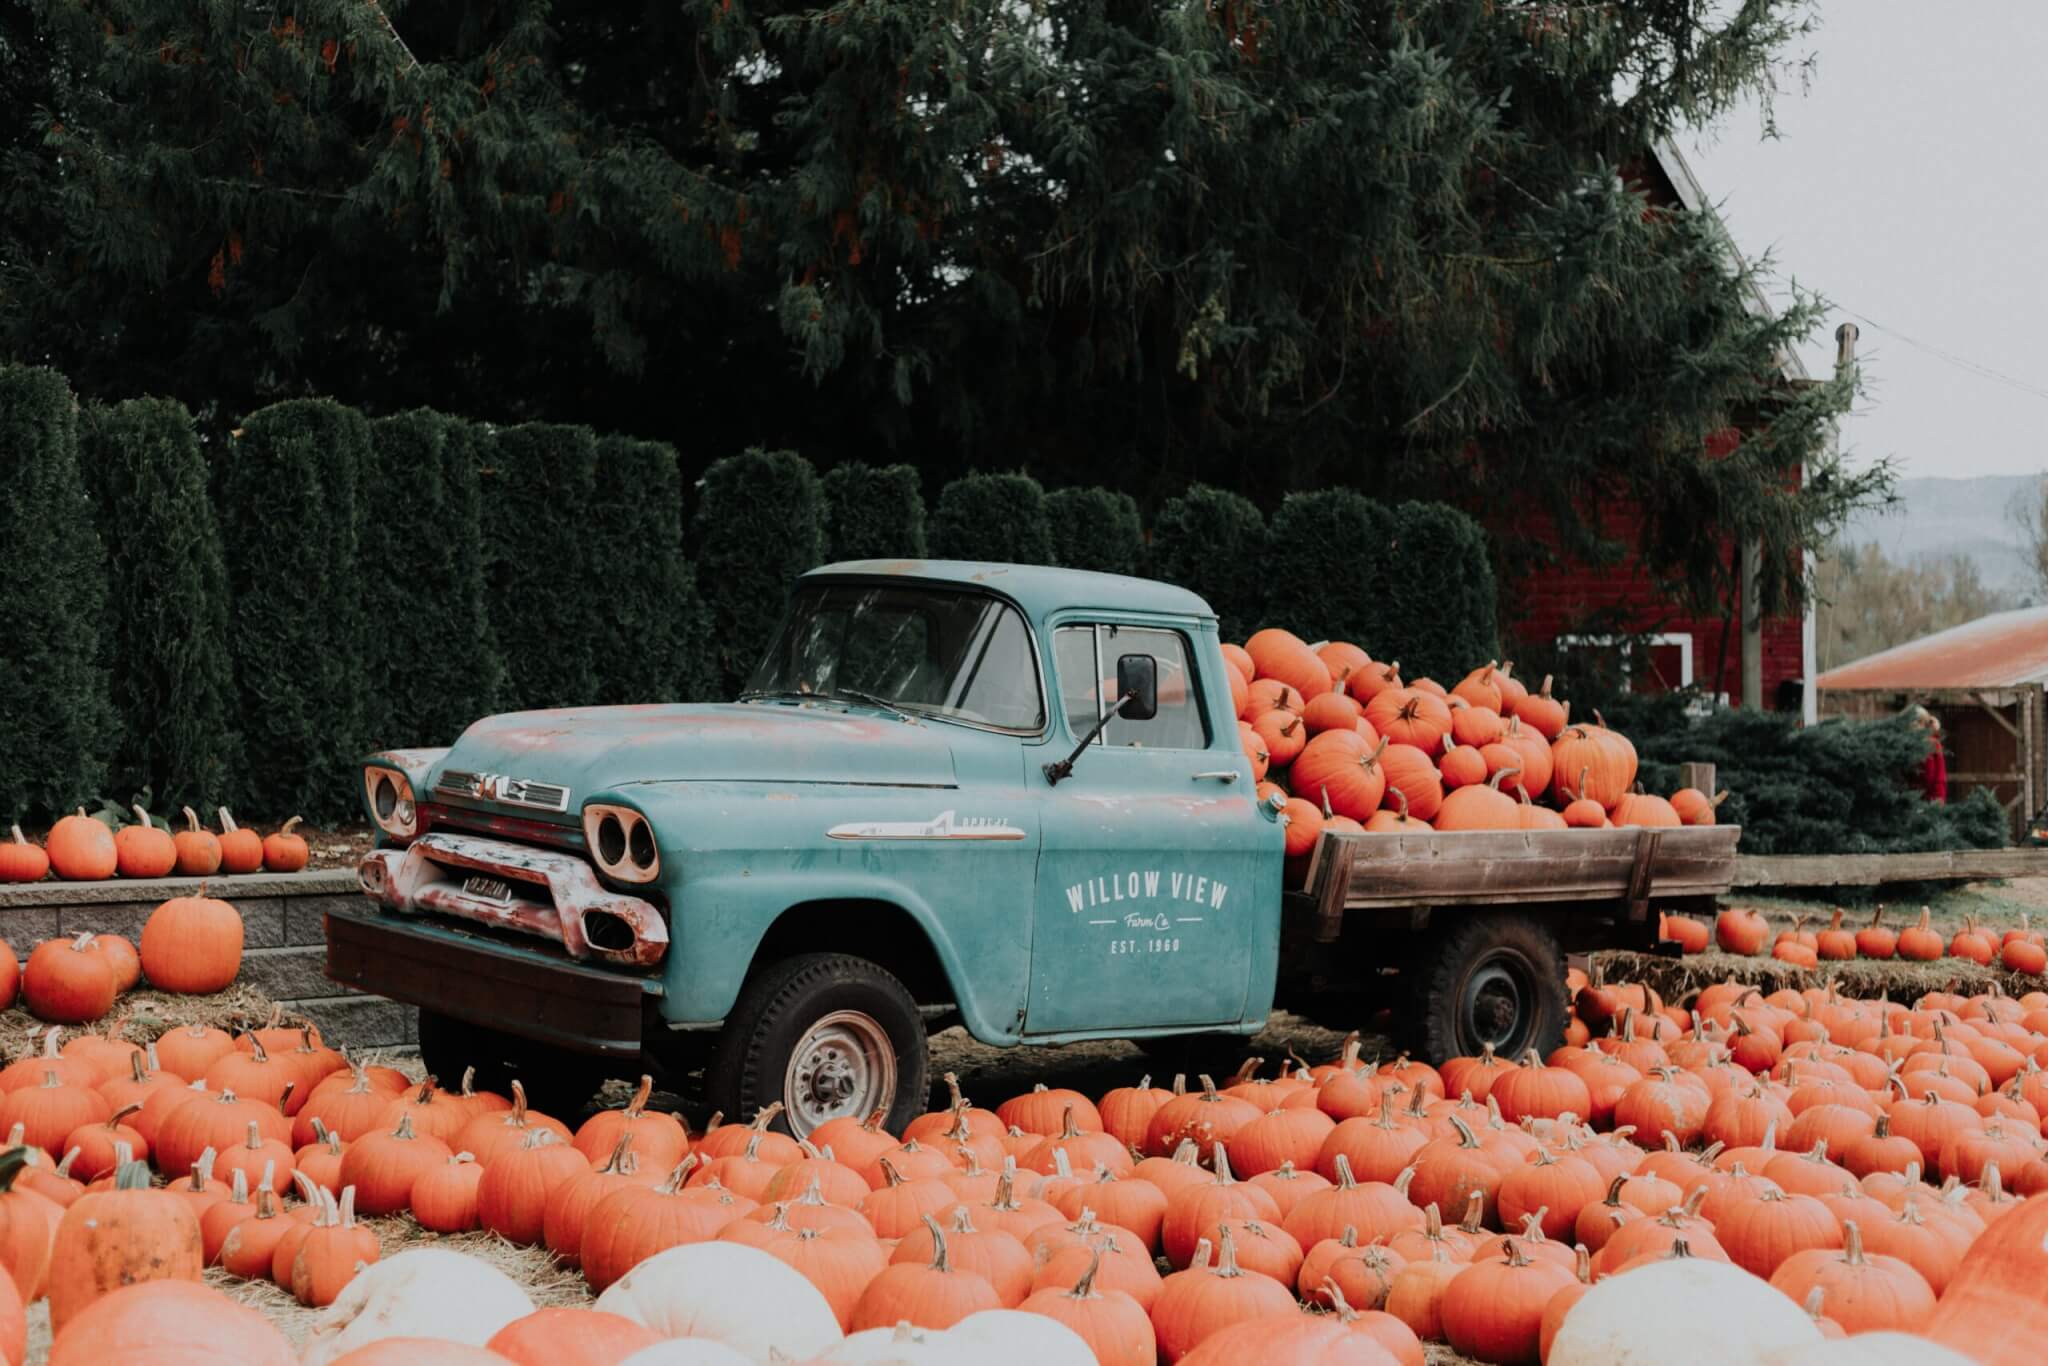 A charming, rusty old truck in a pumpkin patch